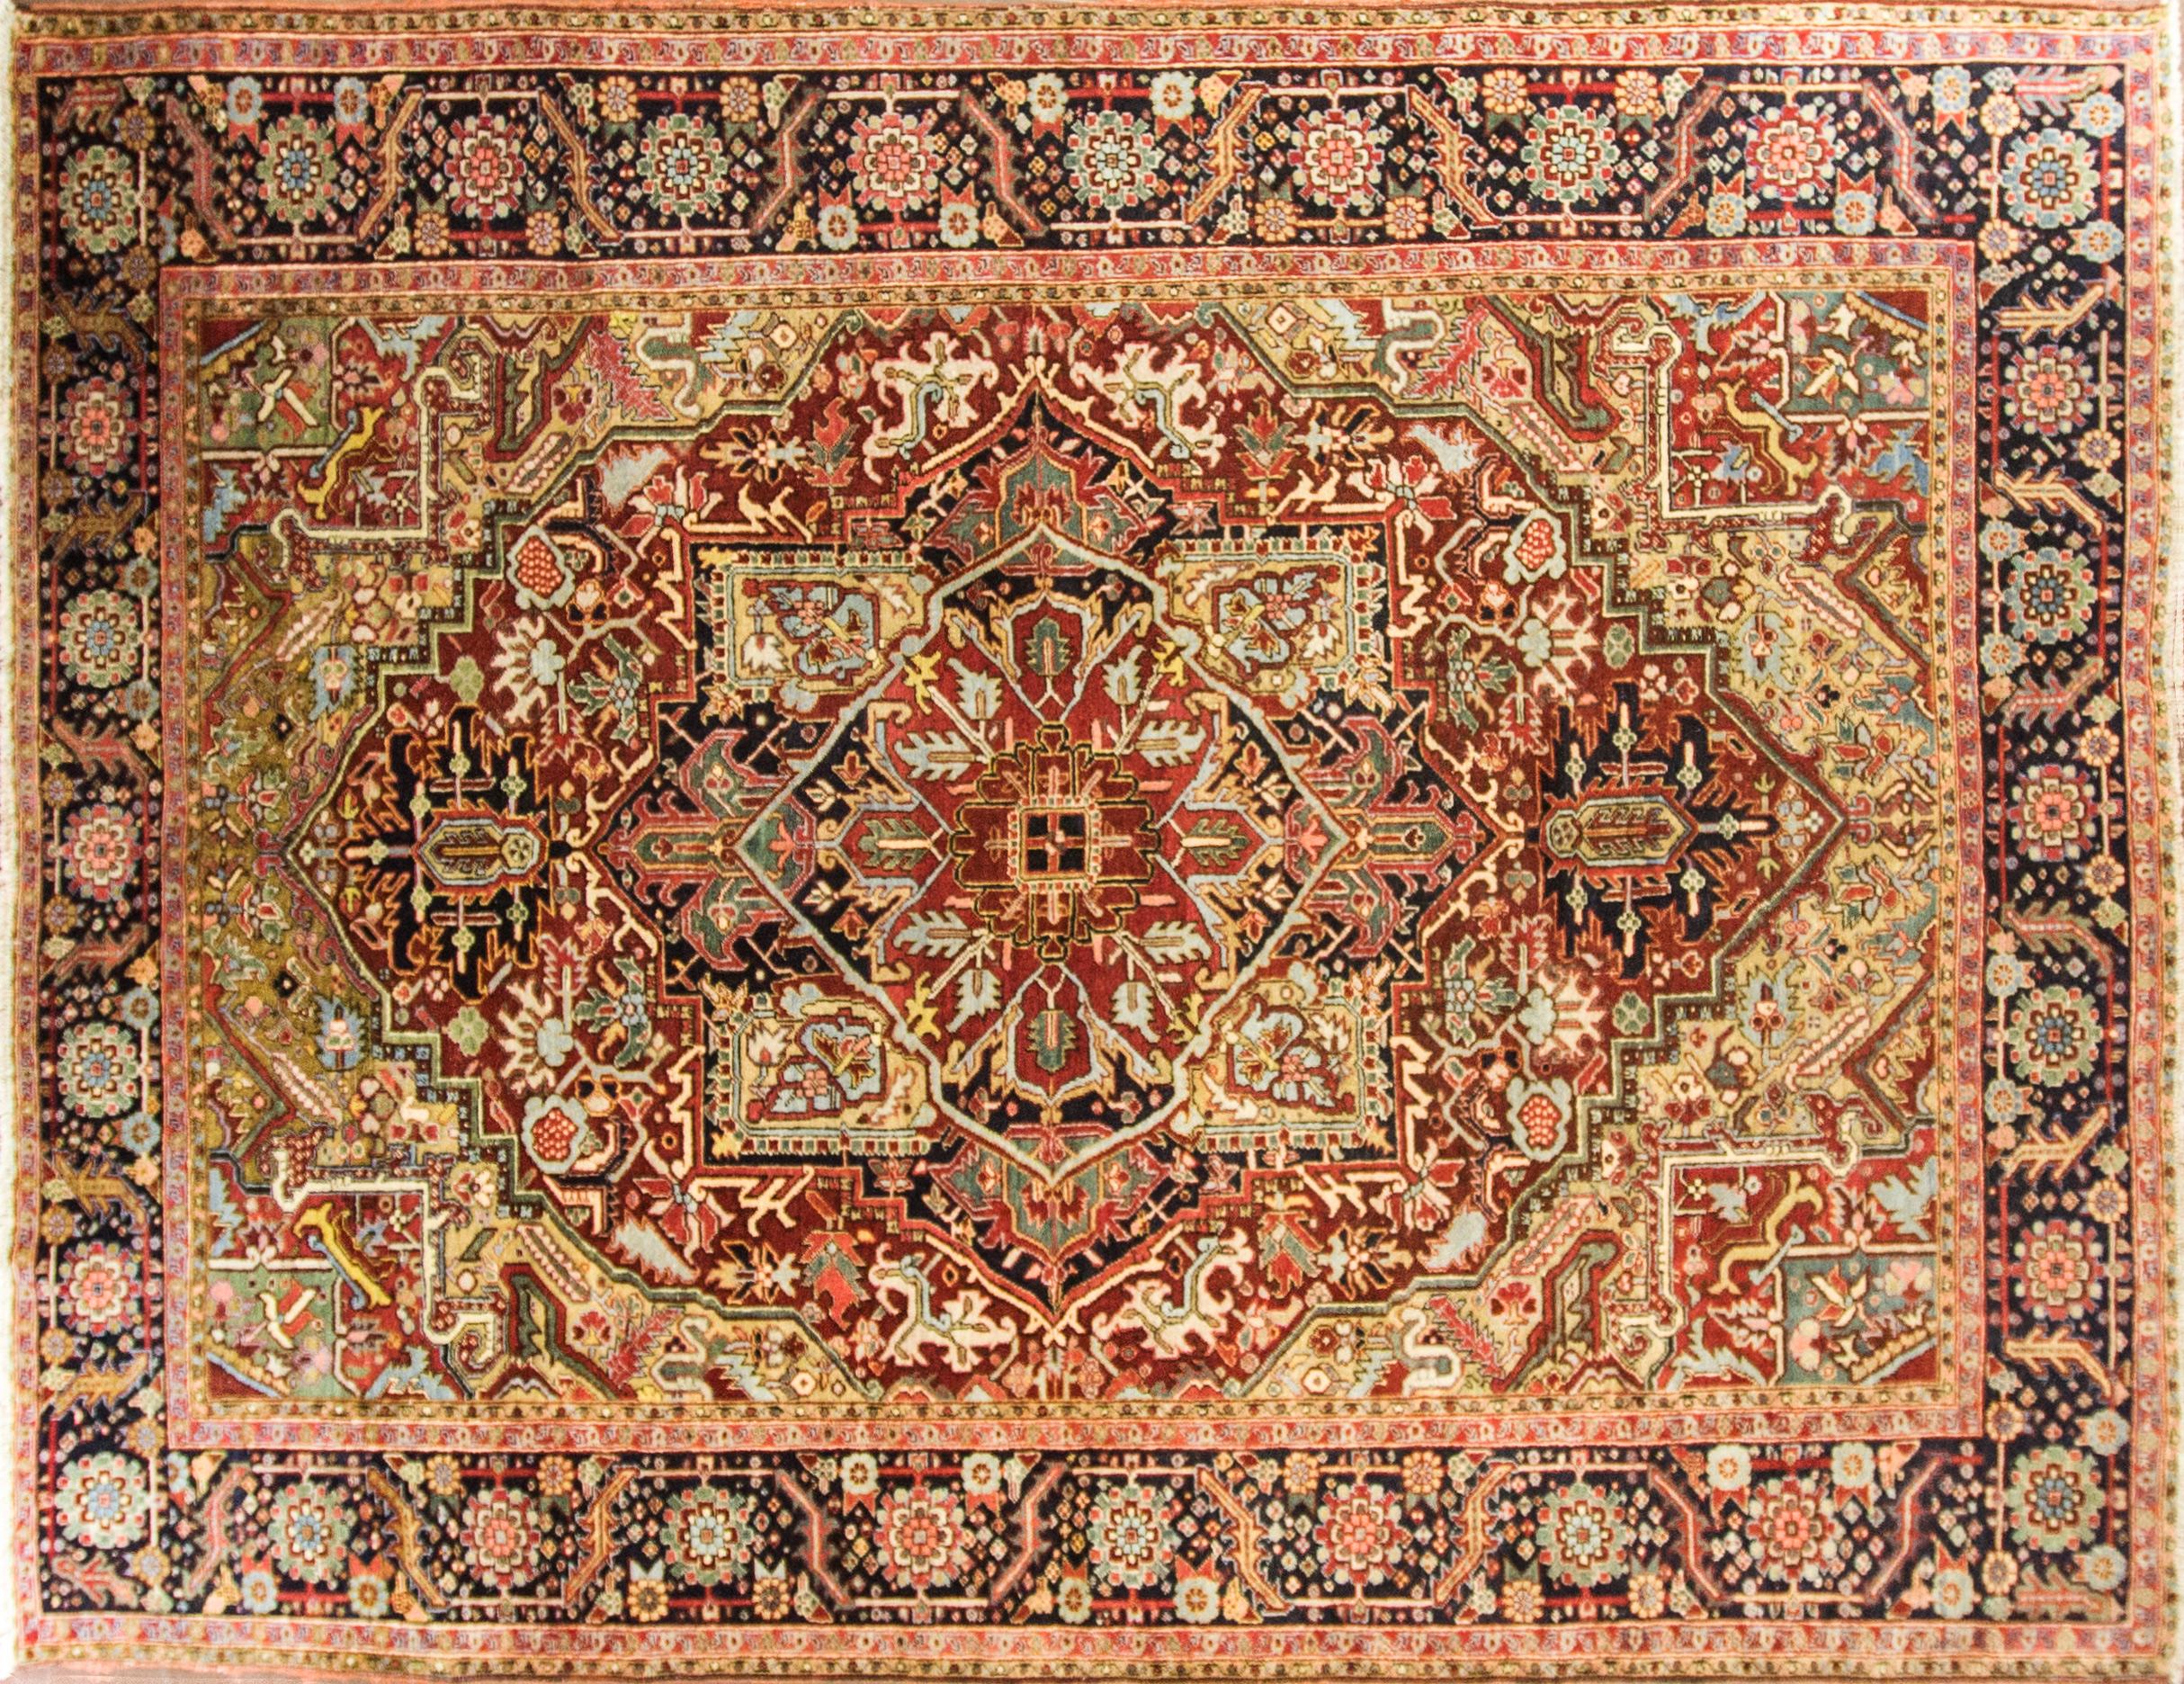 This remarkable and artistic antique rug showcases an ornate, multicolored central design. At the heart of the antique Persian Heriz Serapi rug, a many-petaled flower is surrounded by a 12-pointed stellar shape in light and dark blue. Angular